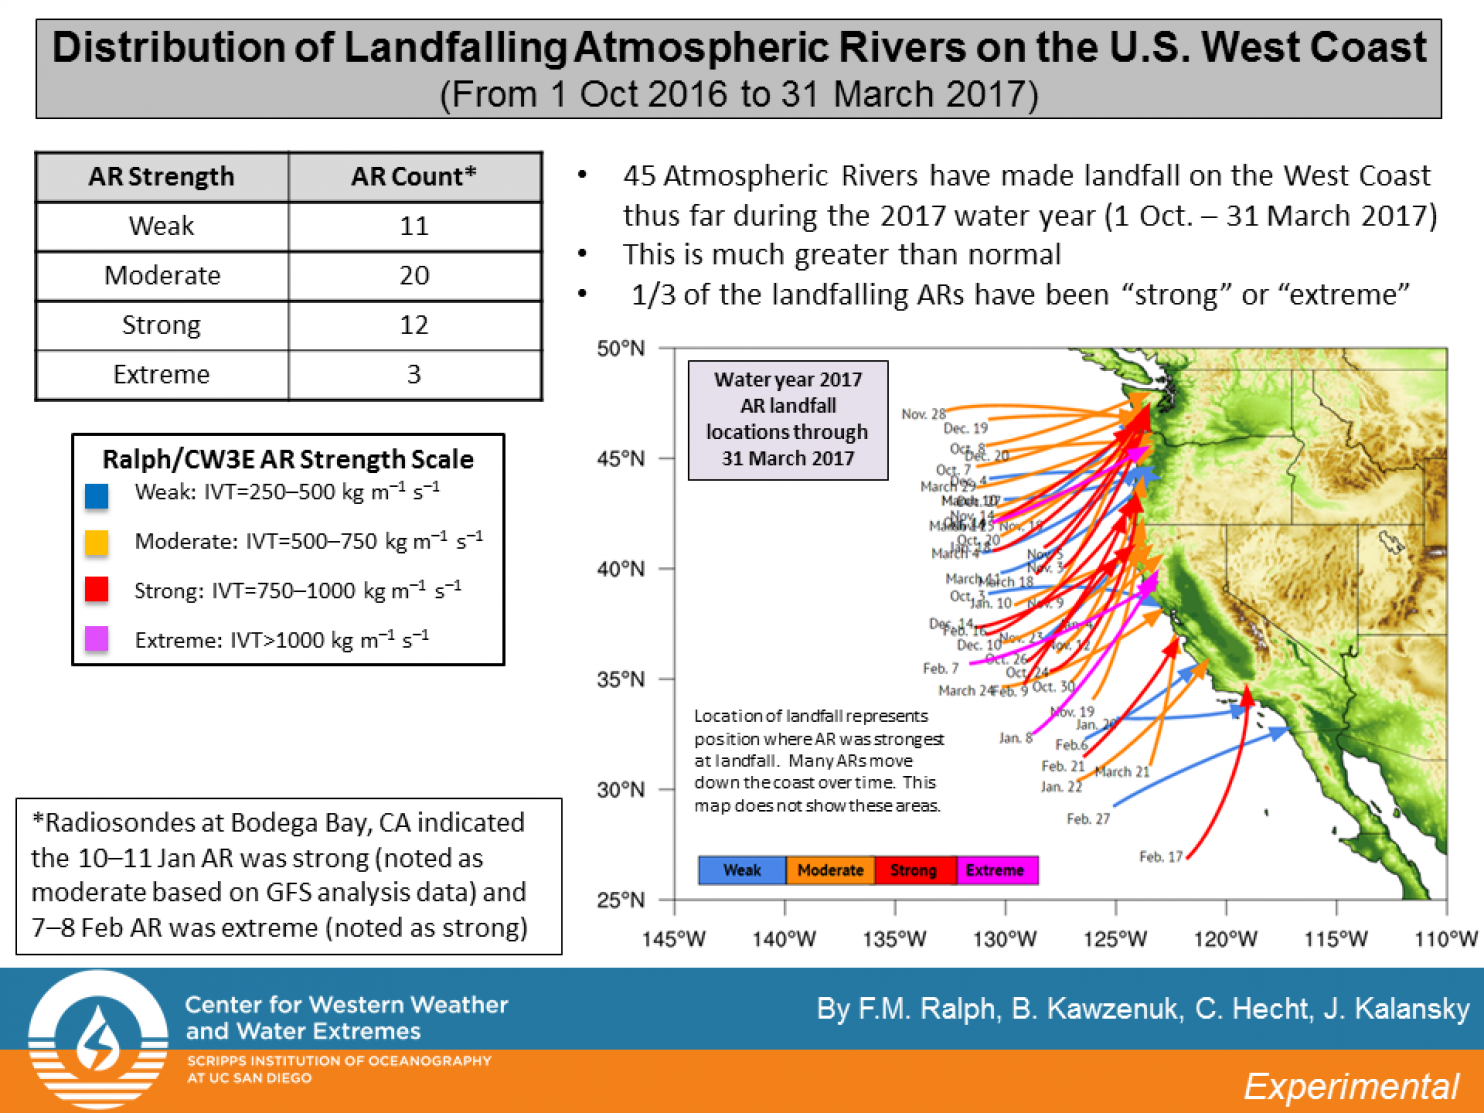 Distribution of landfalling atmospheric rivers on the US West Coast (2017)